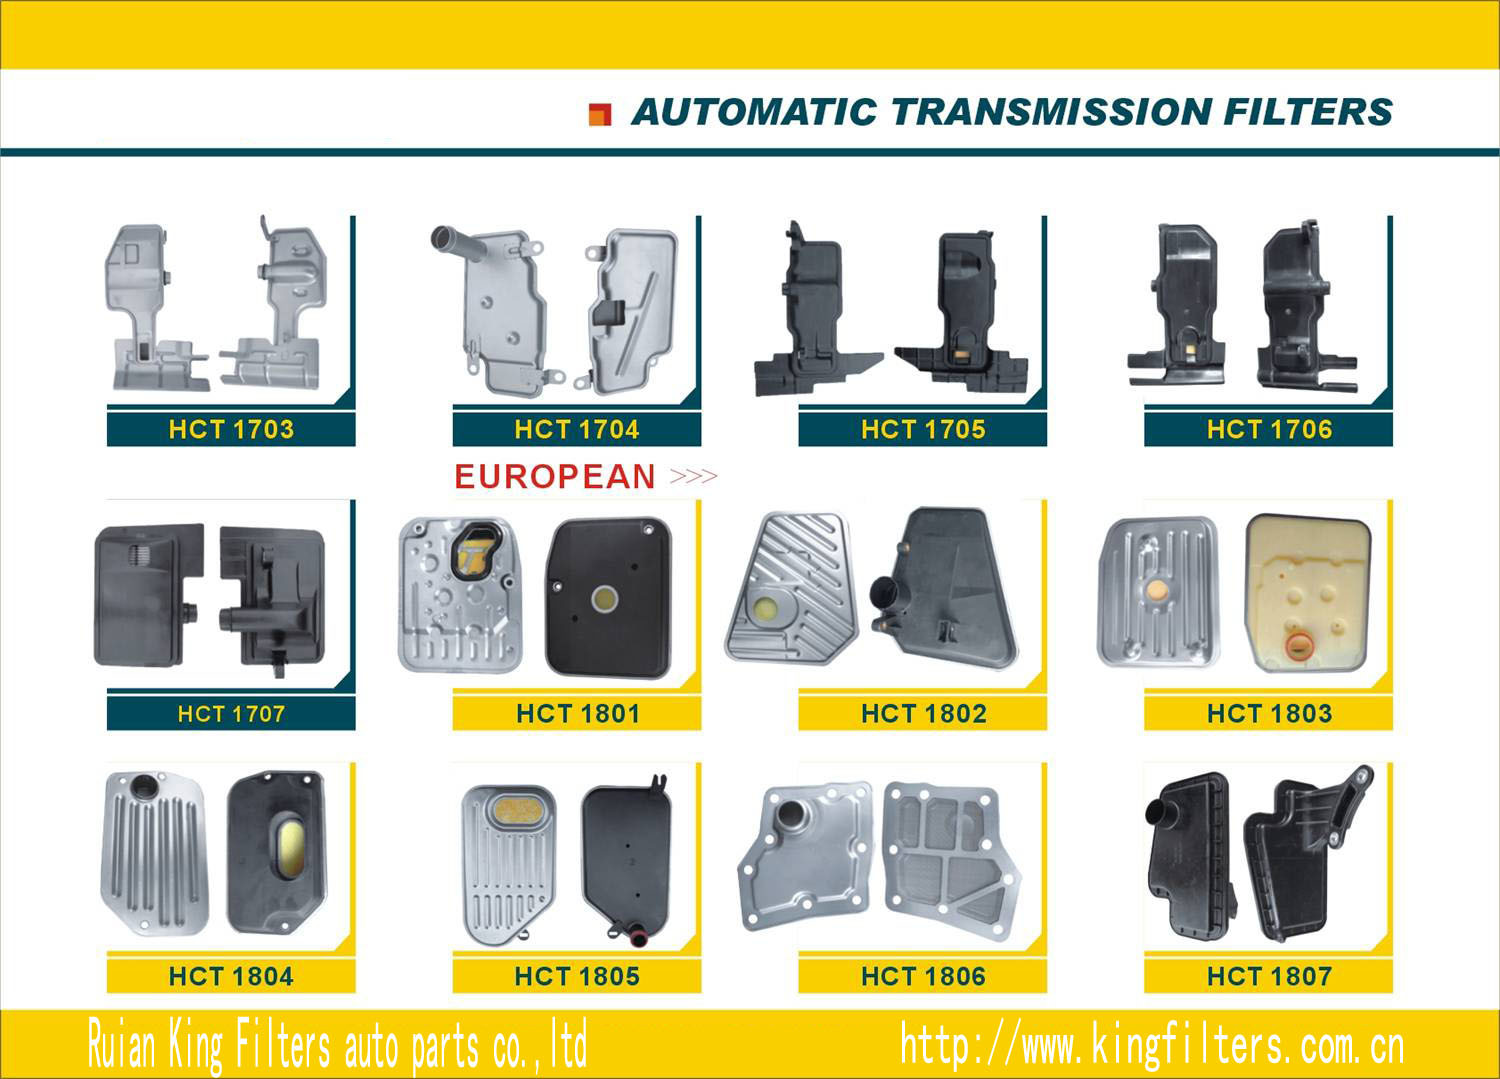 Automatic Transmission Filters for European